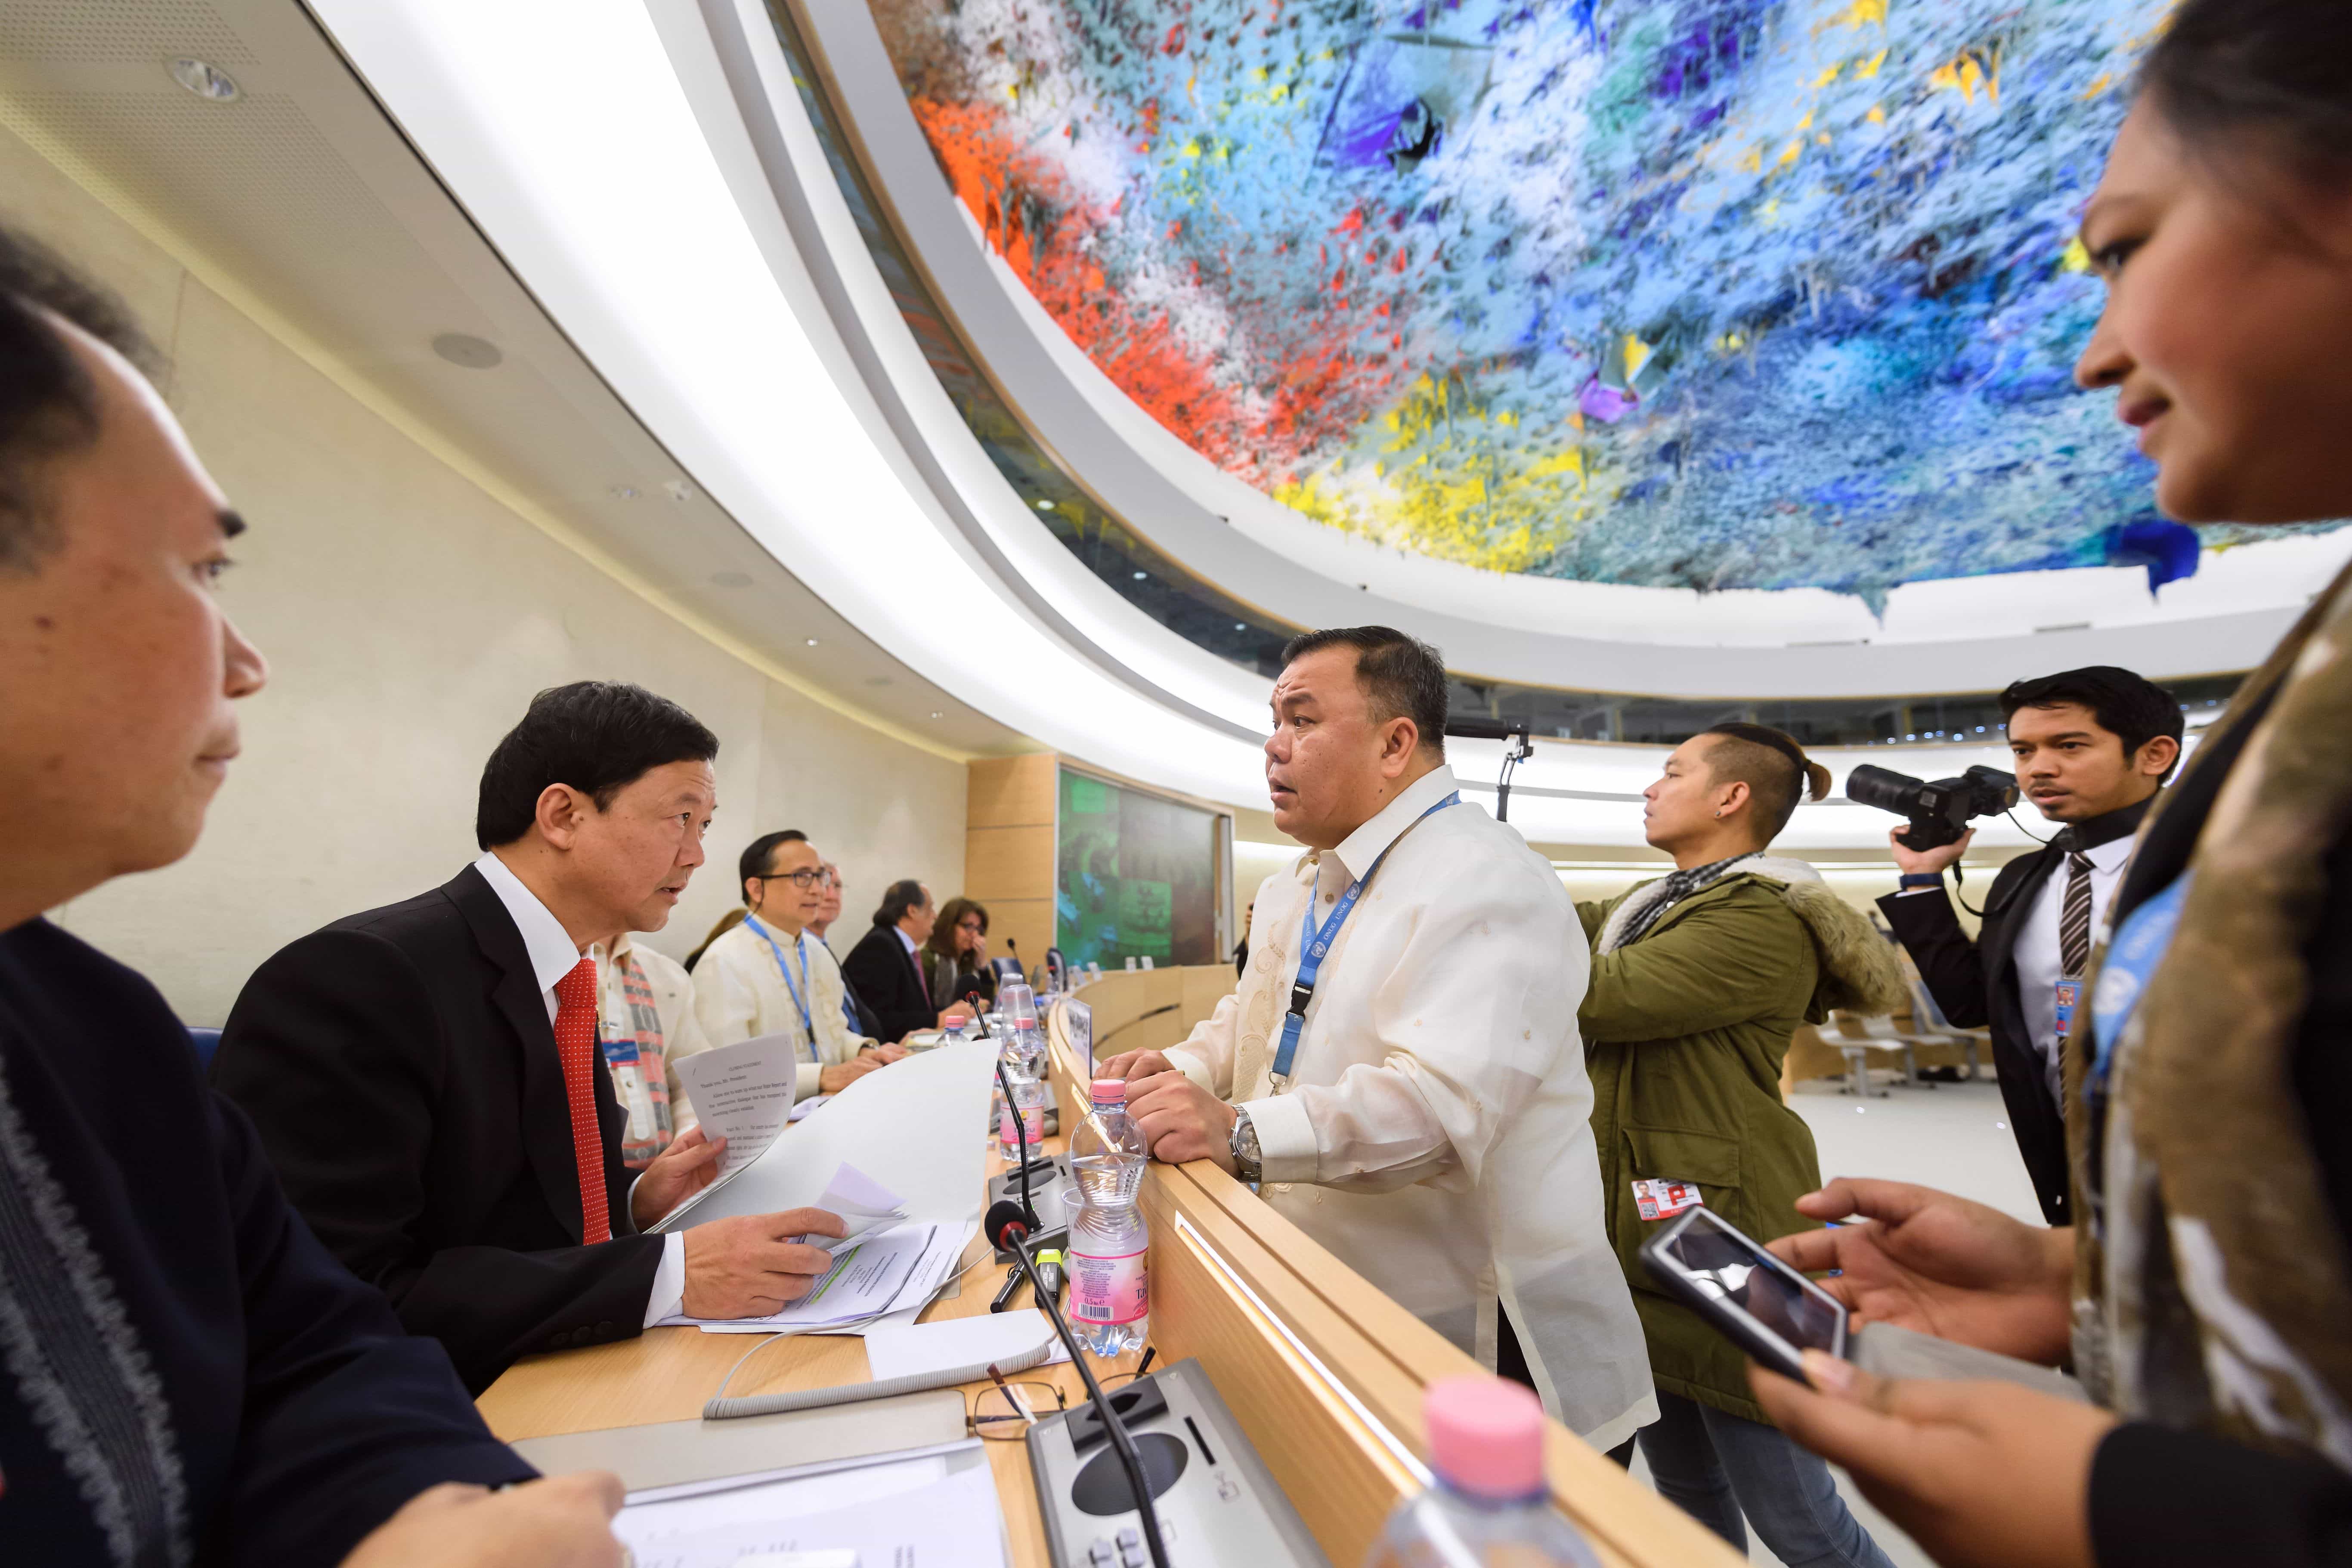 Head of the Philippines' delegation speaks with a man prior to the start of universal periodic review of the Philippines by the Office of the United Nations High Commissioner for Human Rights on May 8, 2017, FABRICE COFFRINI/AFP/Getty Images